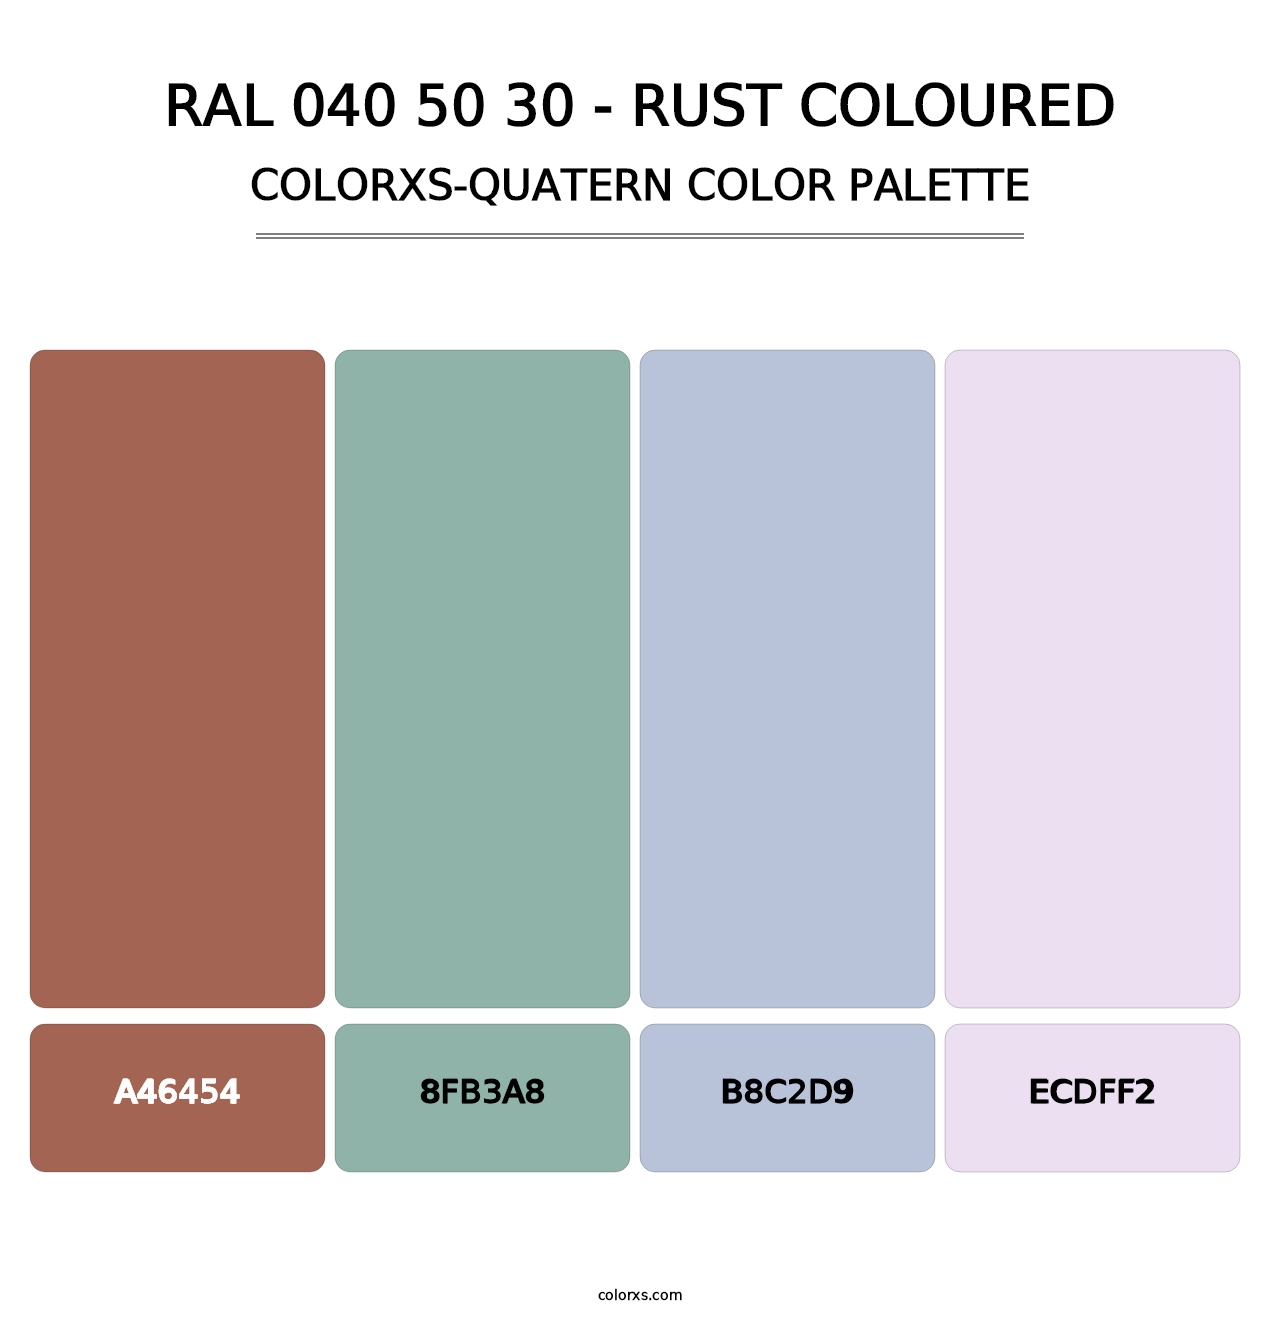 RAL 040 50 30 - Rust Coloured - Colorxs Quatern Palette